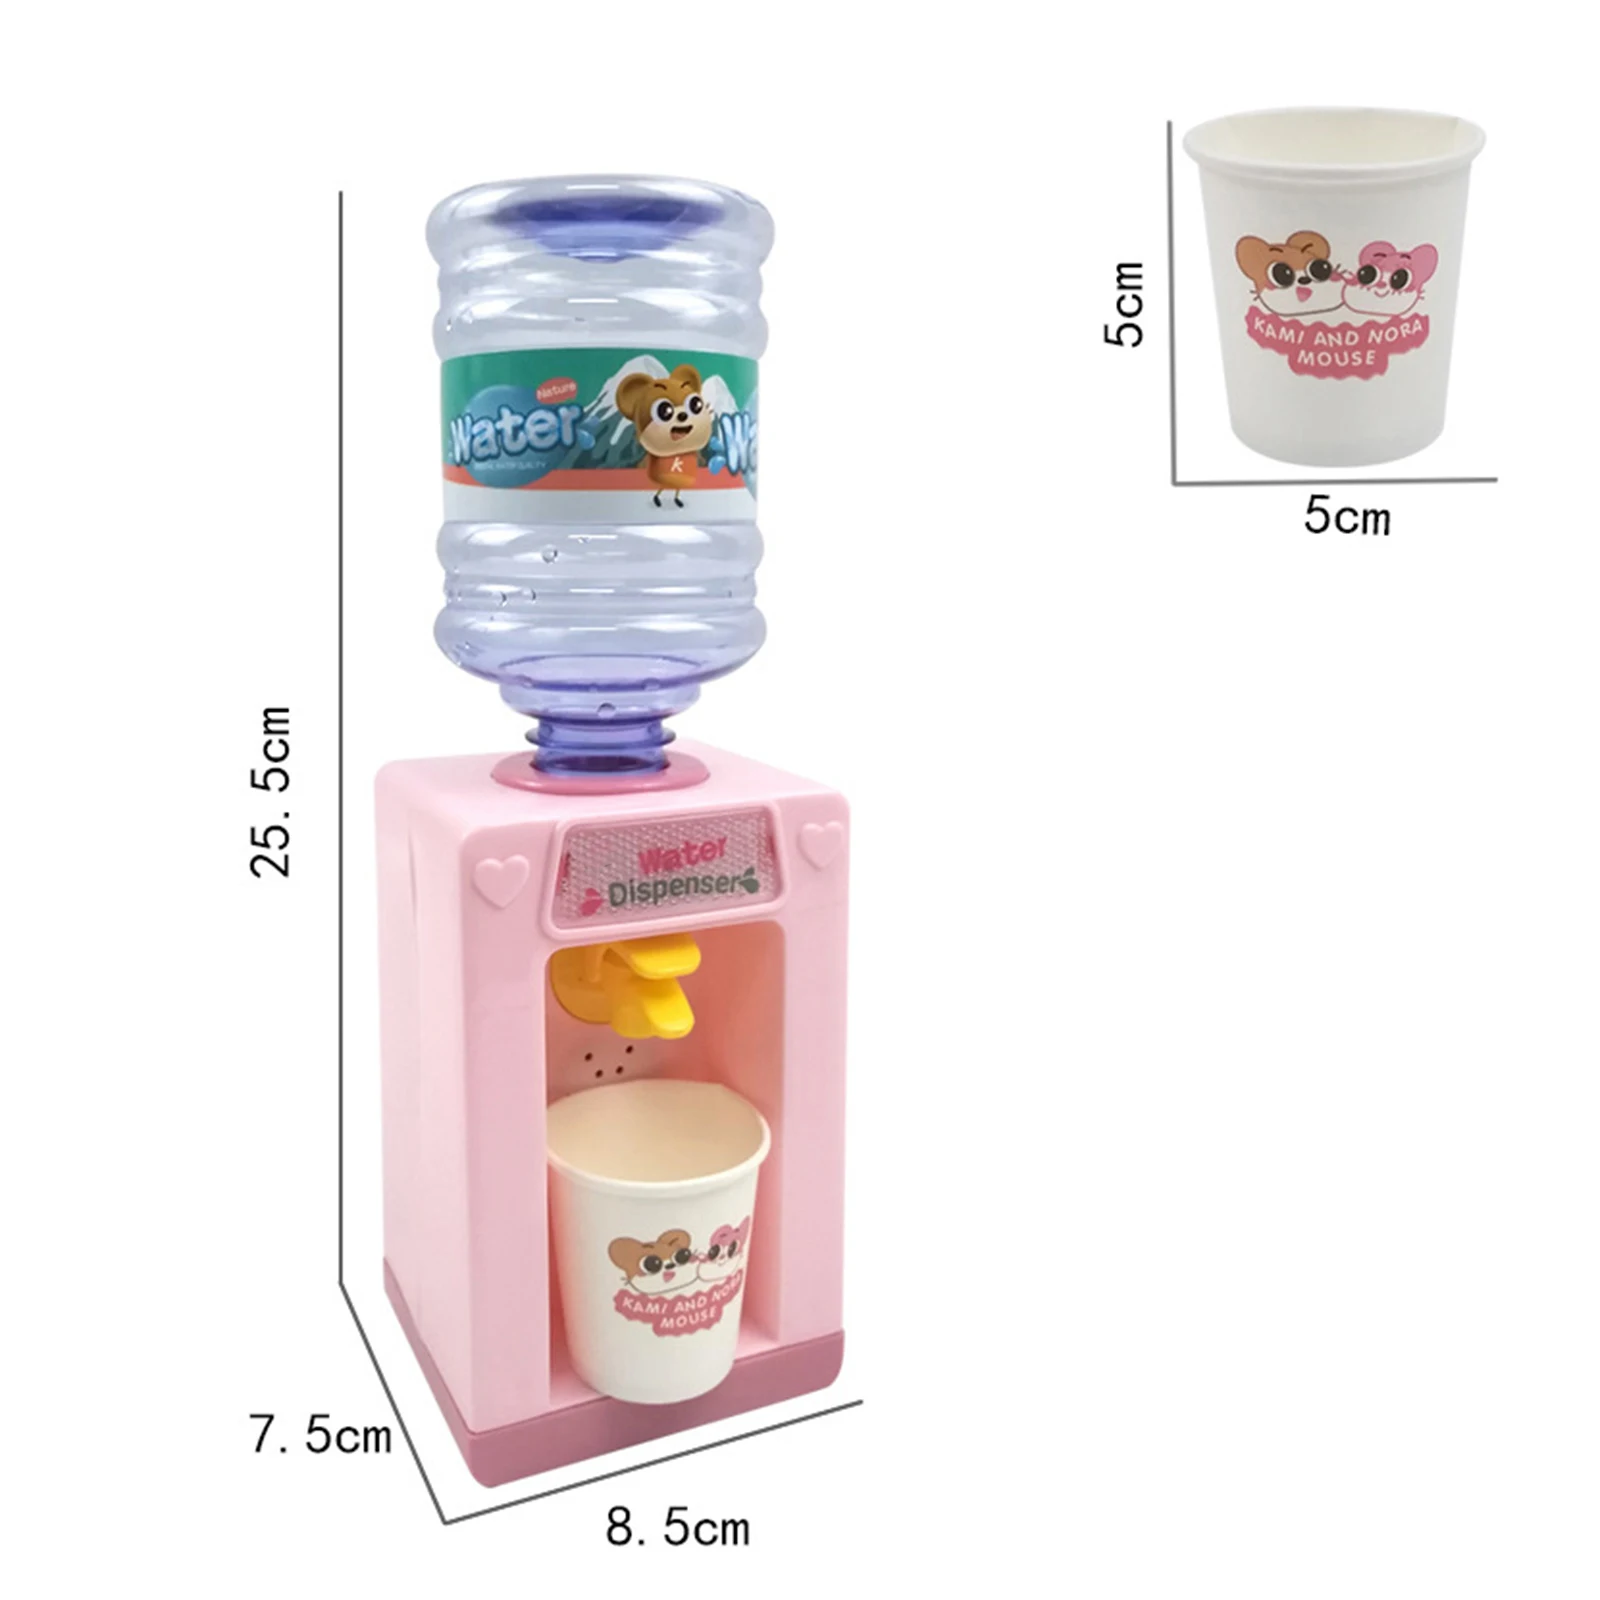 

Kid Simulated Play House Beverage Machine Mini Water Dispenser Toy Children Kitchen Pretend Toys Role Playing Kitchen Toys Gift